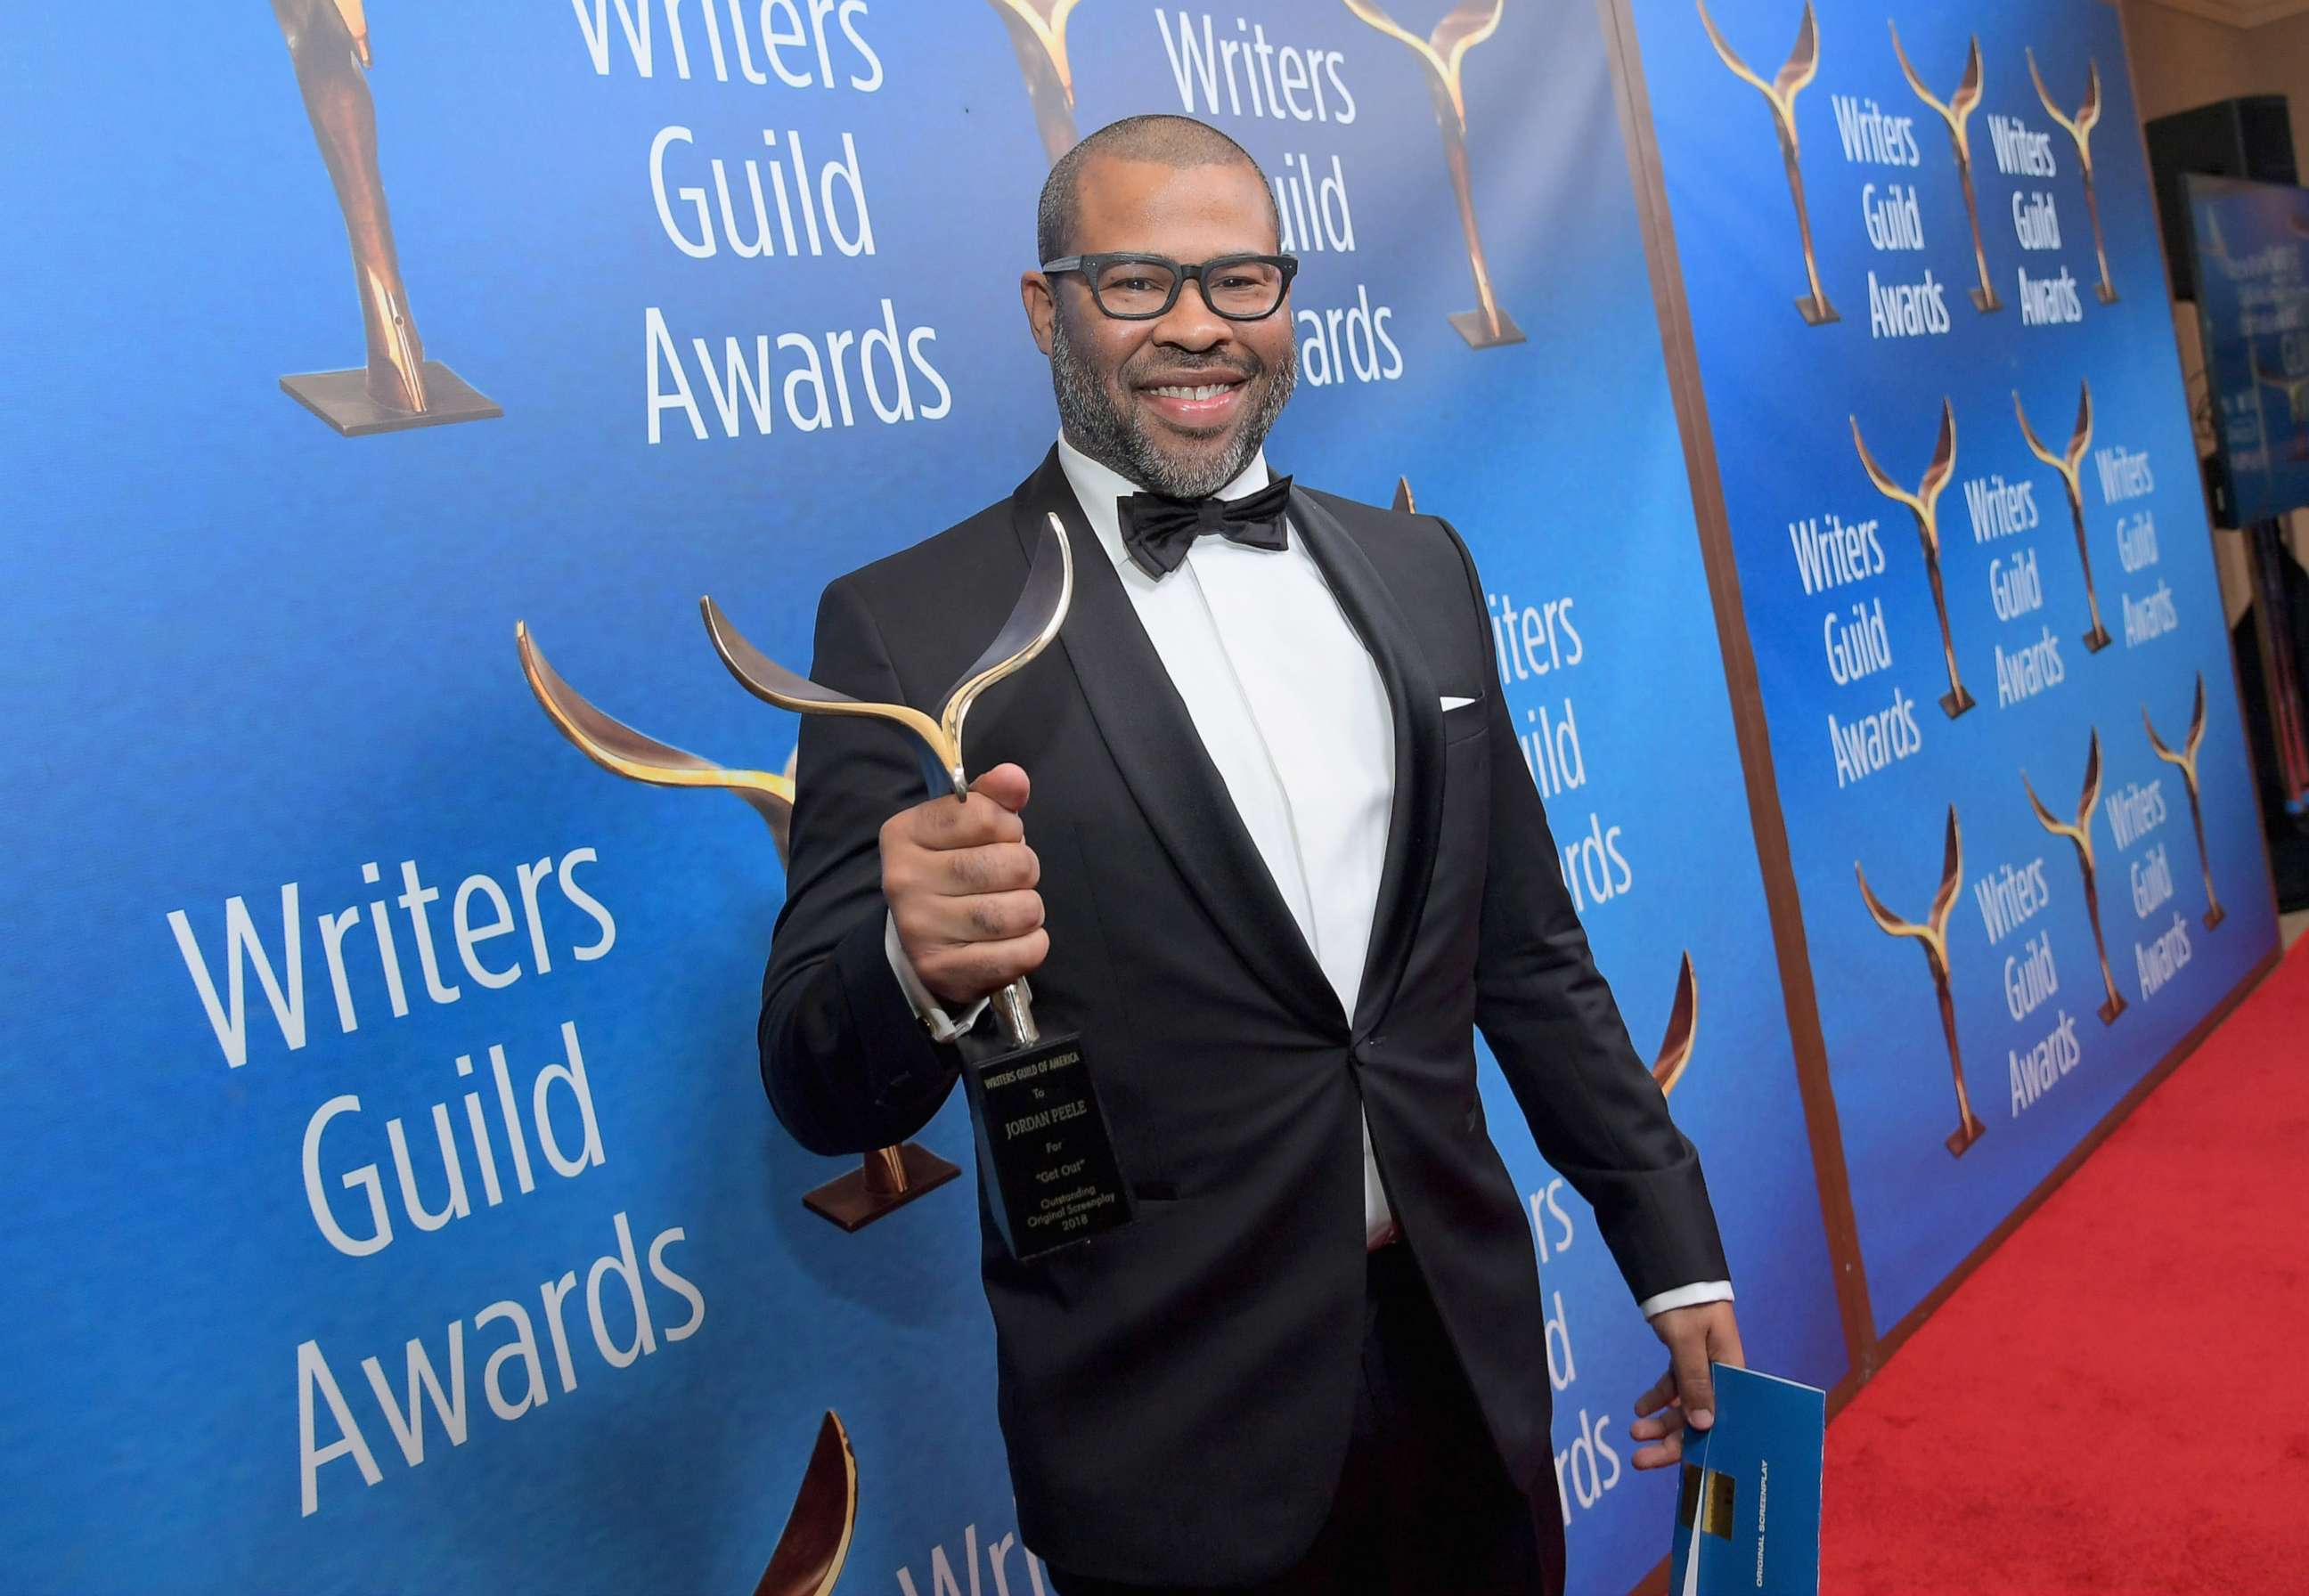 PHOTO: Writer/actor/director Jordan Peele poses with 'Original Screenplay' award for 'Get Out' during the 2018 Writers Guild Awards L.A. Ceremony at The Beverly Hilton Hotel, Feb. 11, 2018 in Beverly Hills, Calif.